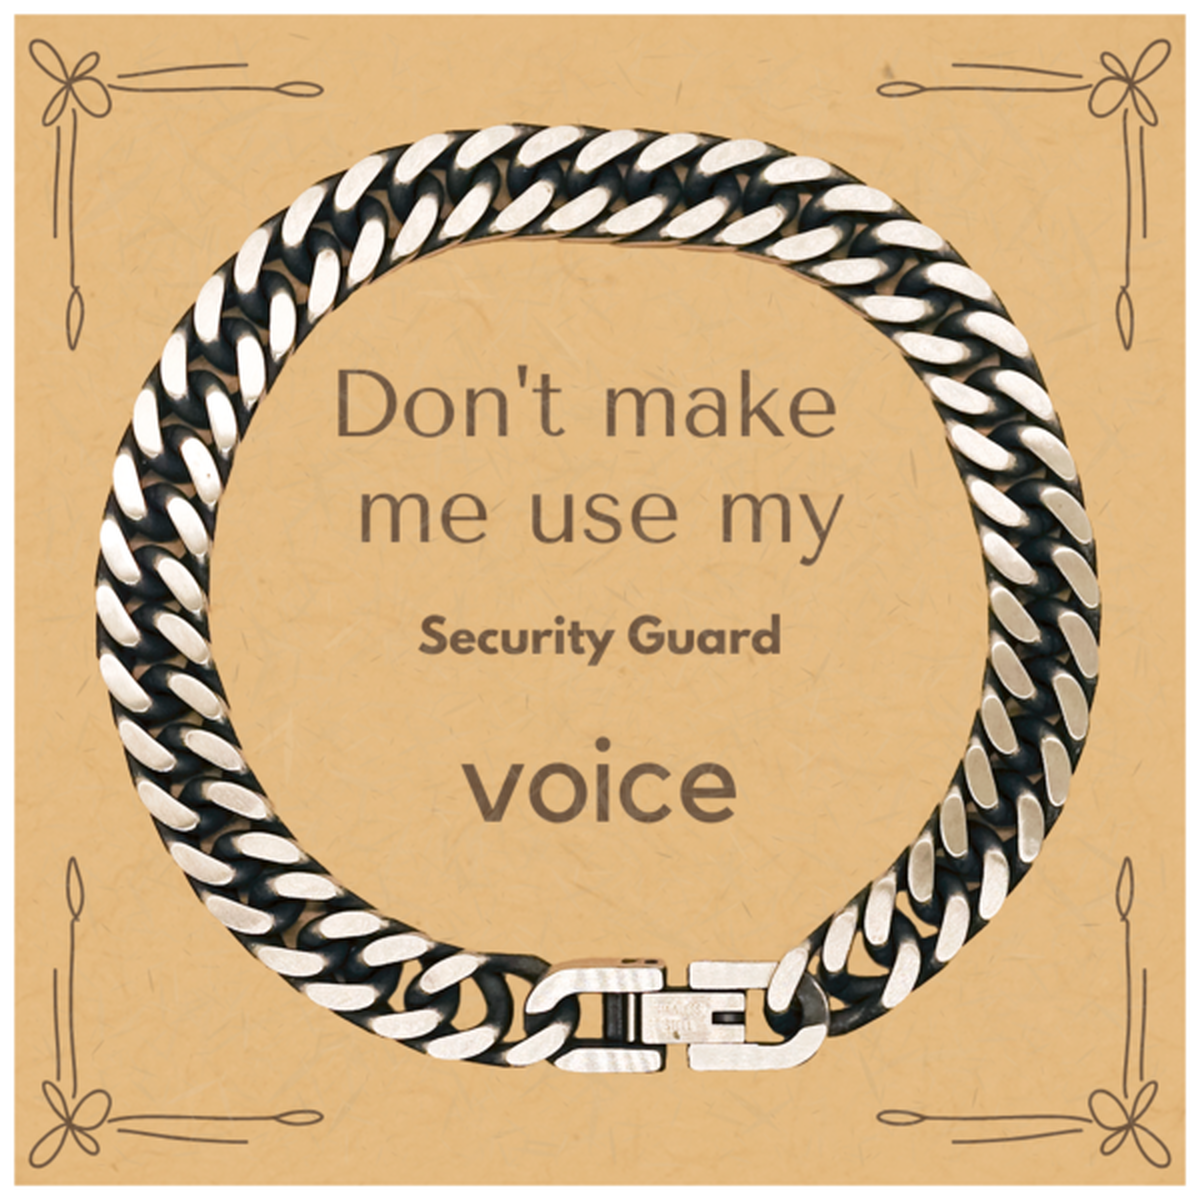 Don't make me use my Security Guard voice, Sarcasm Security Guard Card Gifts, Christmas Security Guard Cuban Link Chain Bracelet Birthday Unique Gifts For Security Guard Coworkers, Men, Women, Colleague, Friends